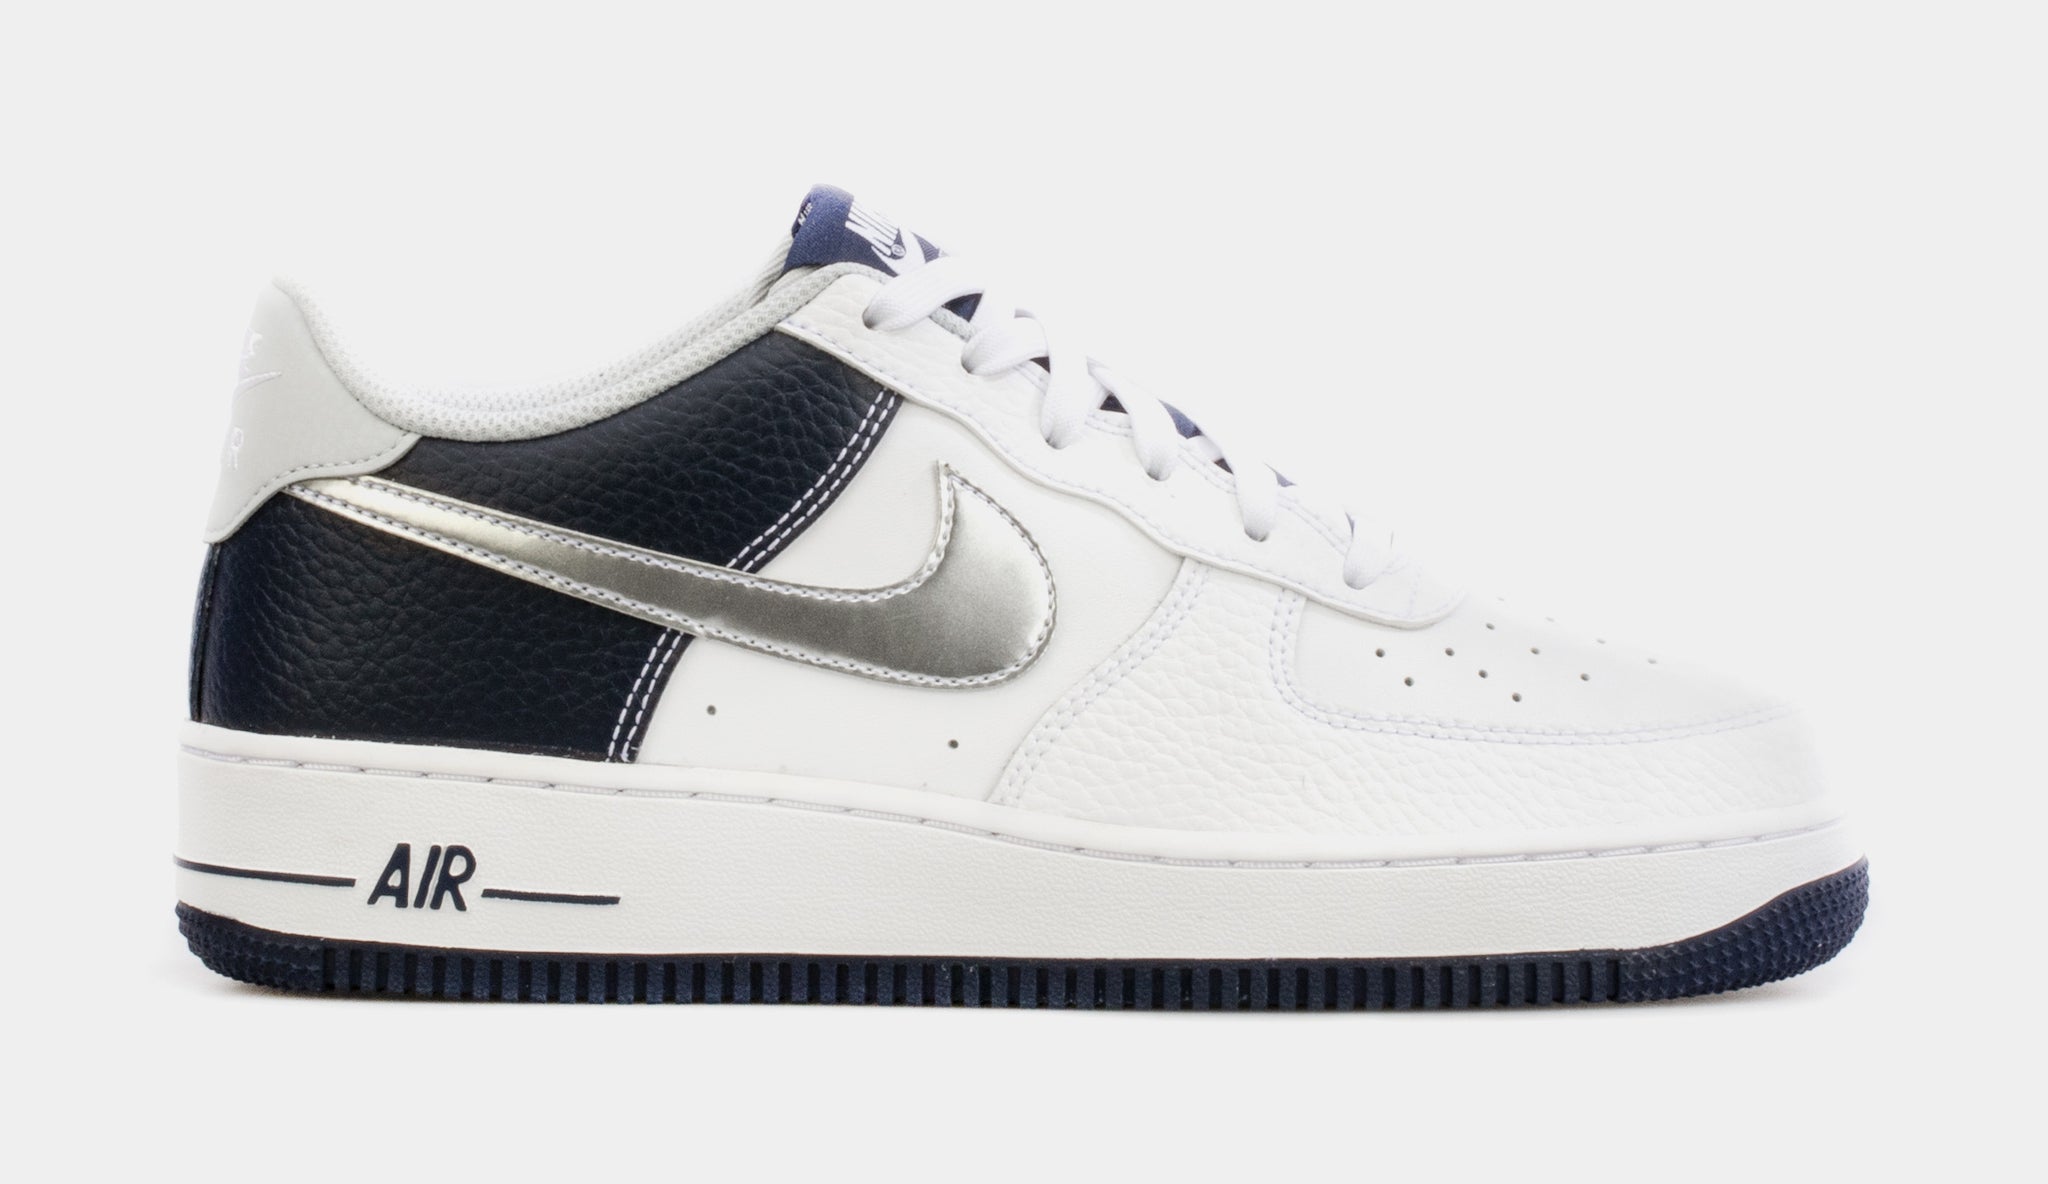 Metallic Silver Swooshes Decorate This Nike Air Force 1 Low